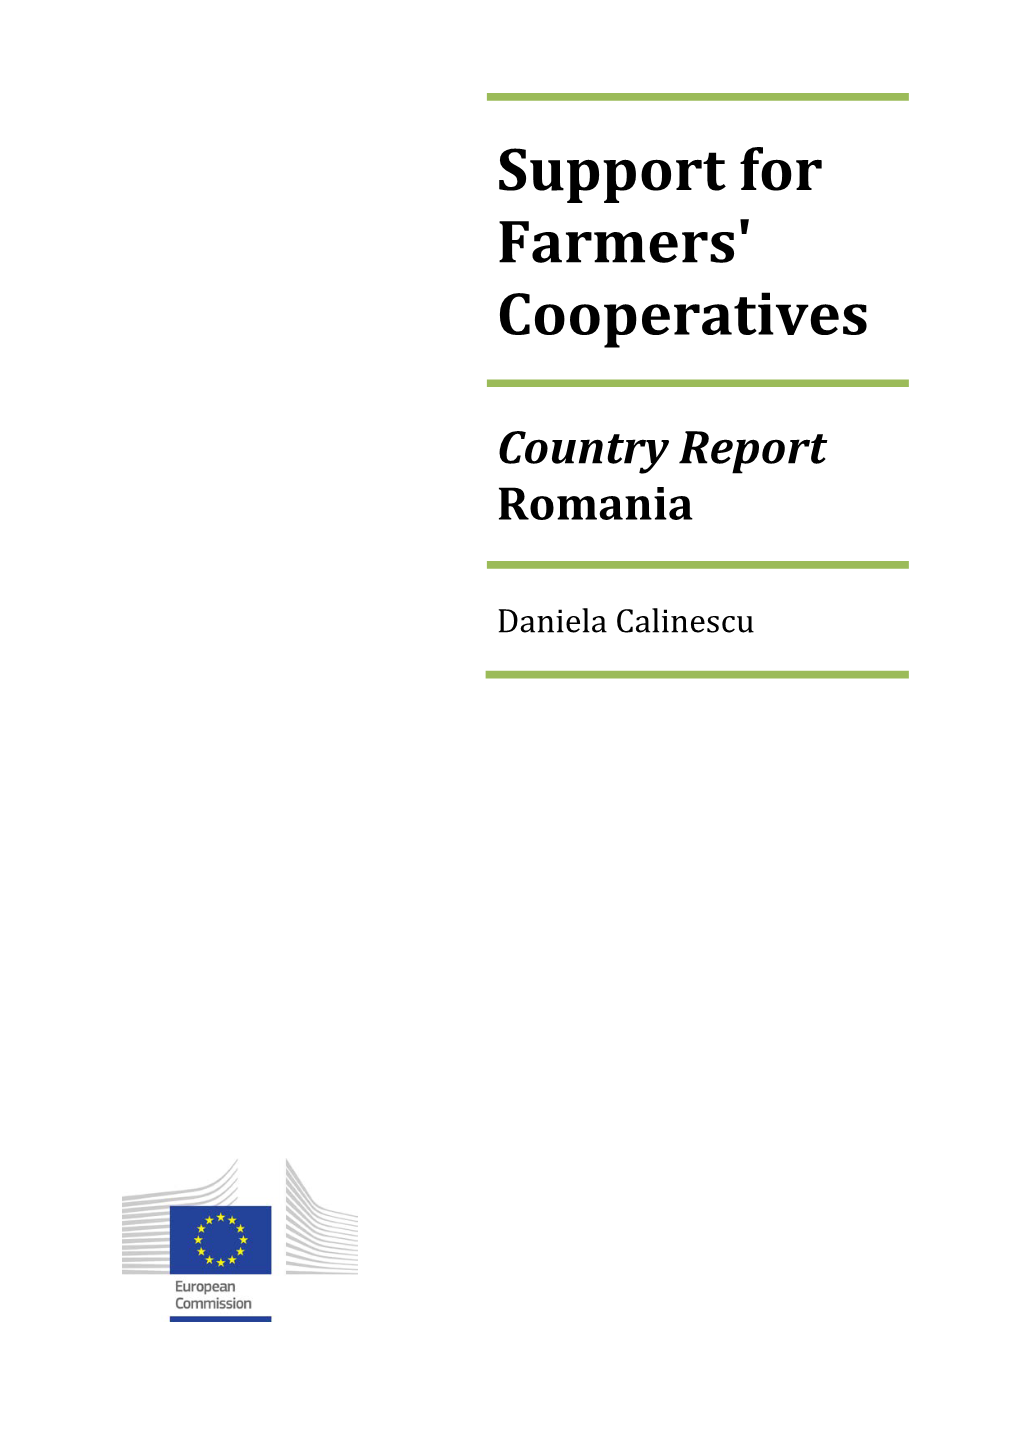 Support for Farmers' Cooperatives Country Report Romania